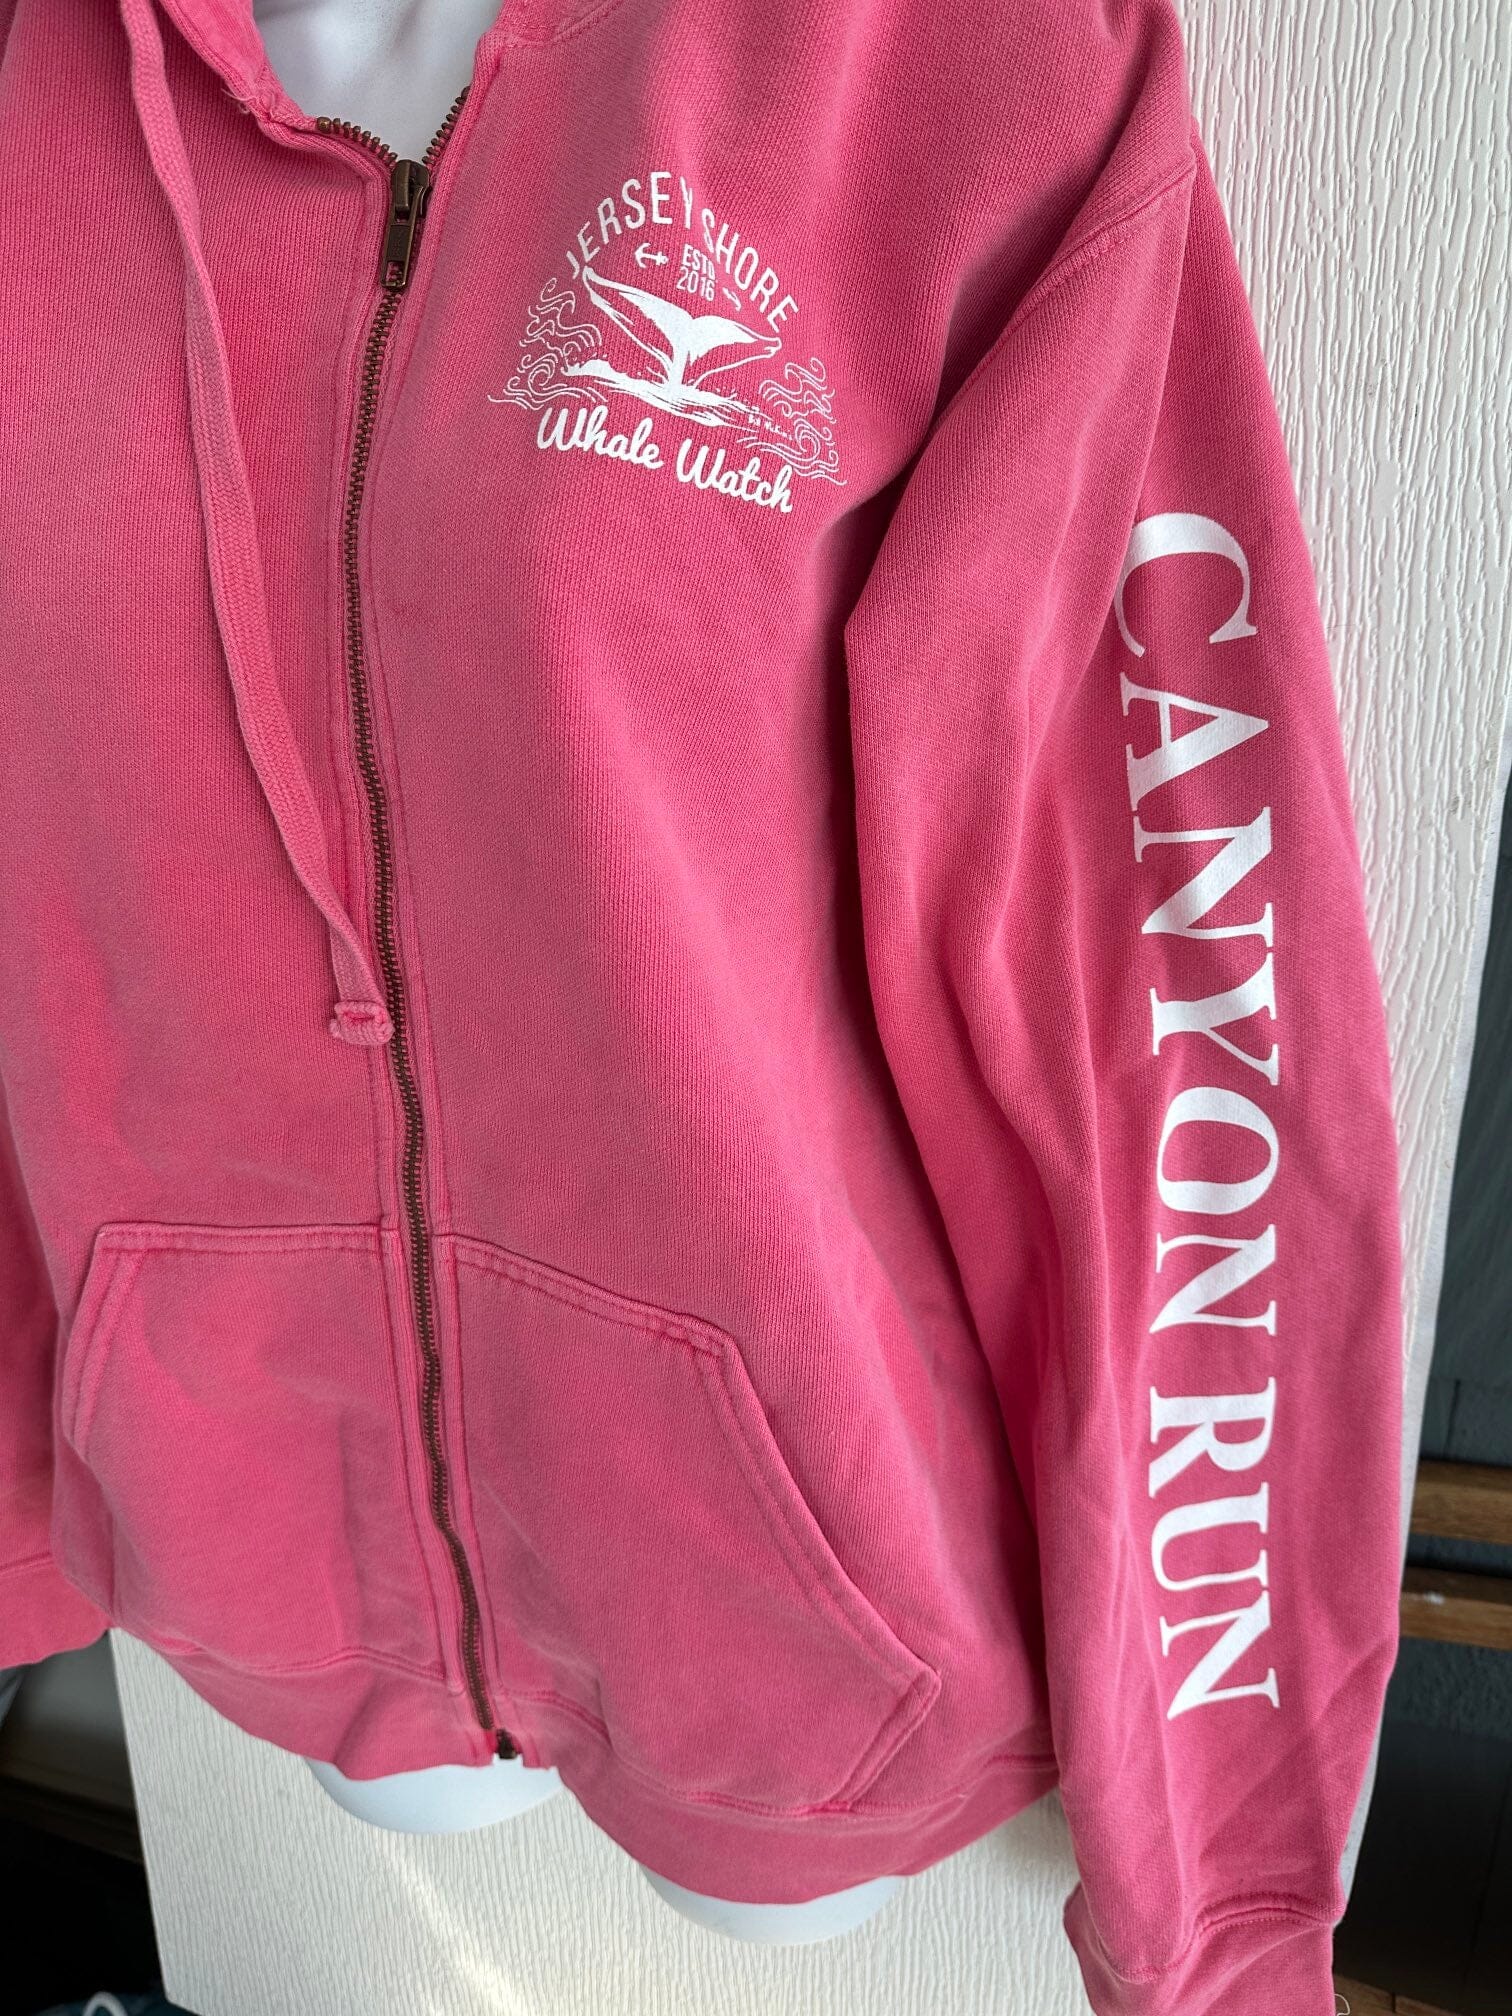 Canyon Run Sweatshirts Jersey Shore Whale Watch Bill McKim Photography -Jersey Shore whale watch tours Small Dust Rose Hoodie 